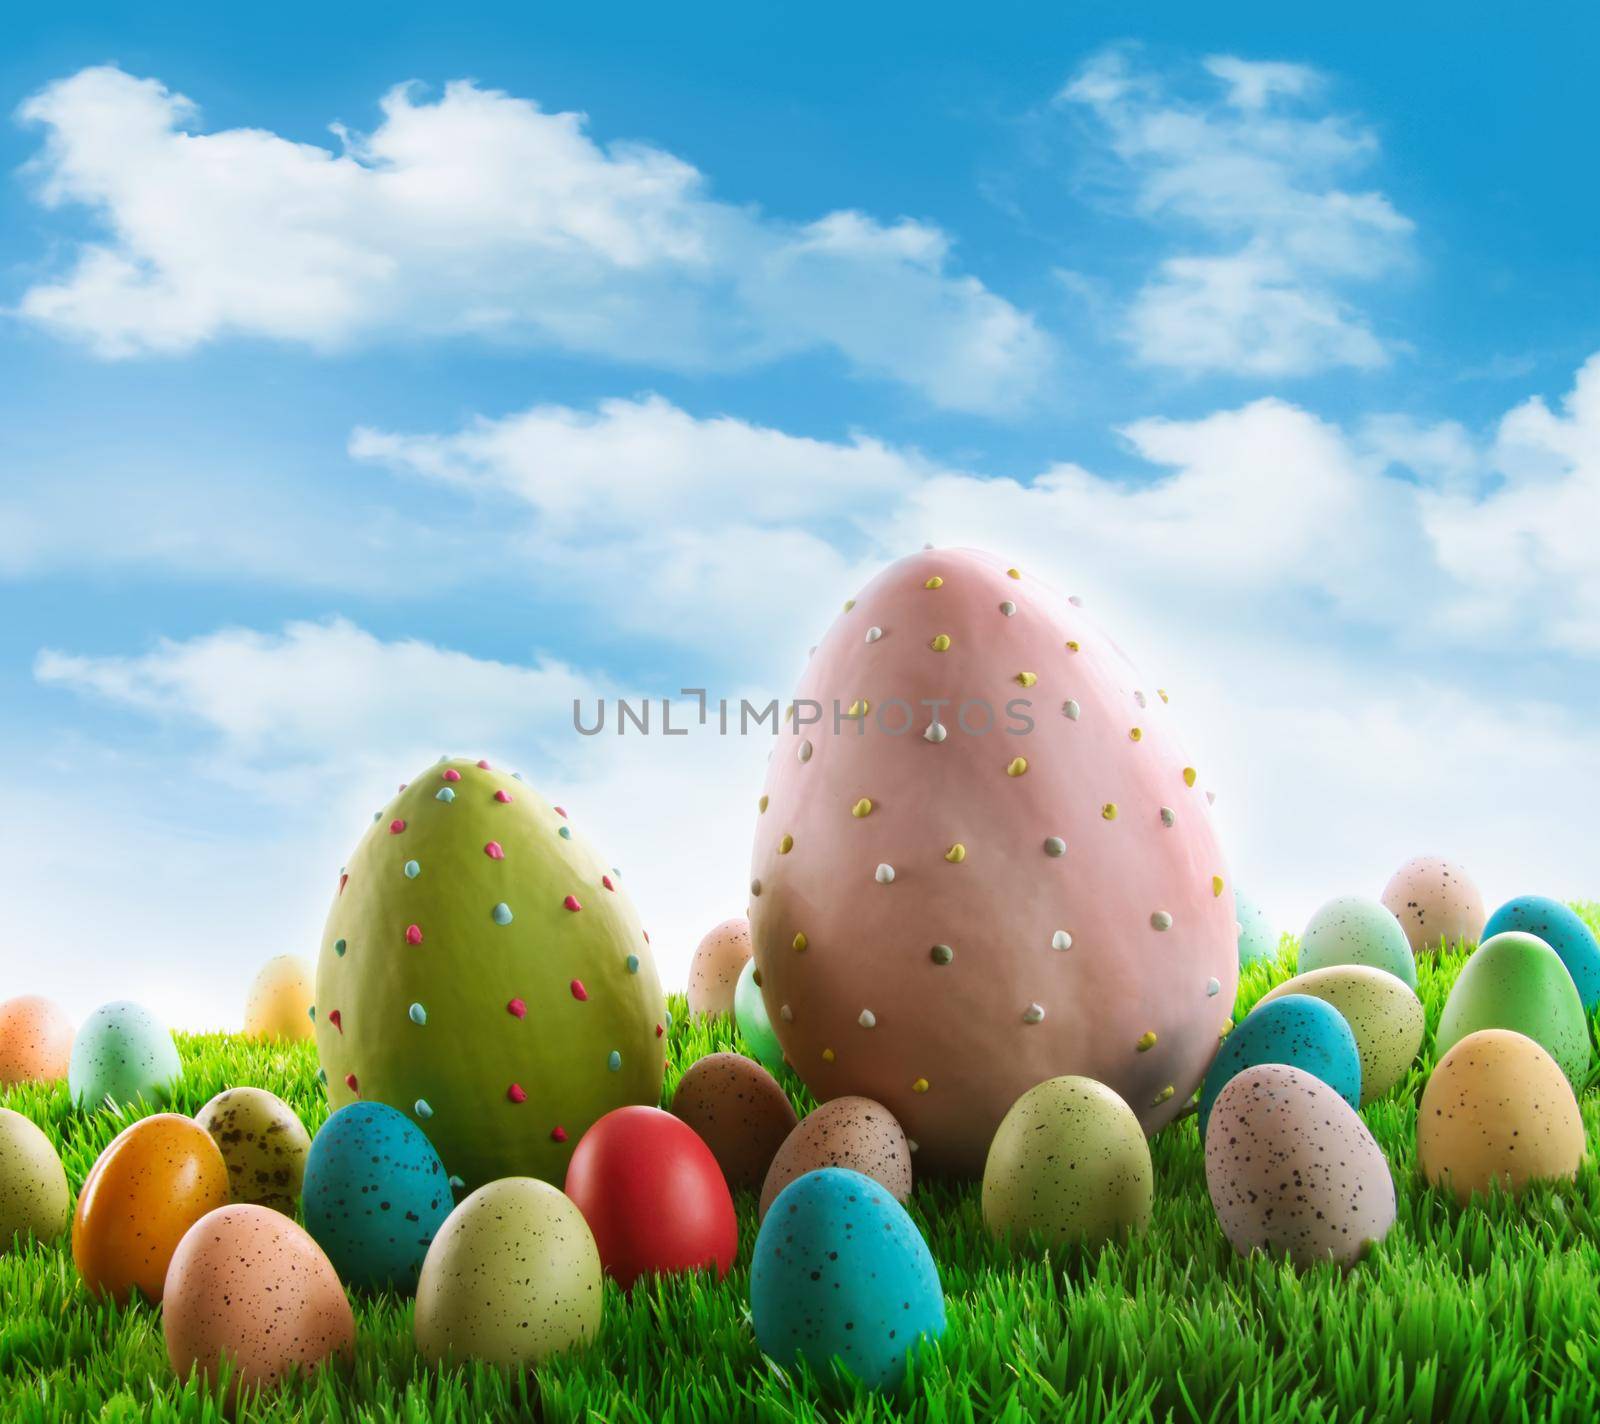 Decorated eggs in the grass with sky in background